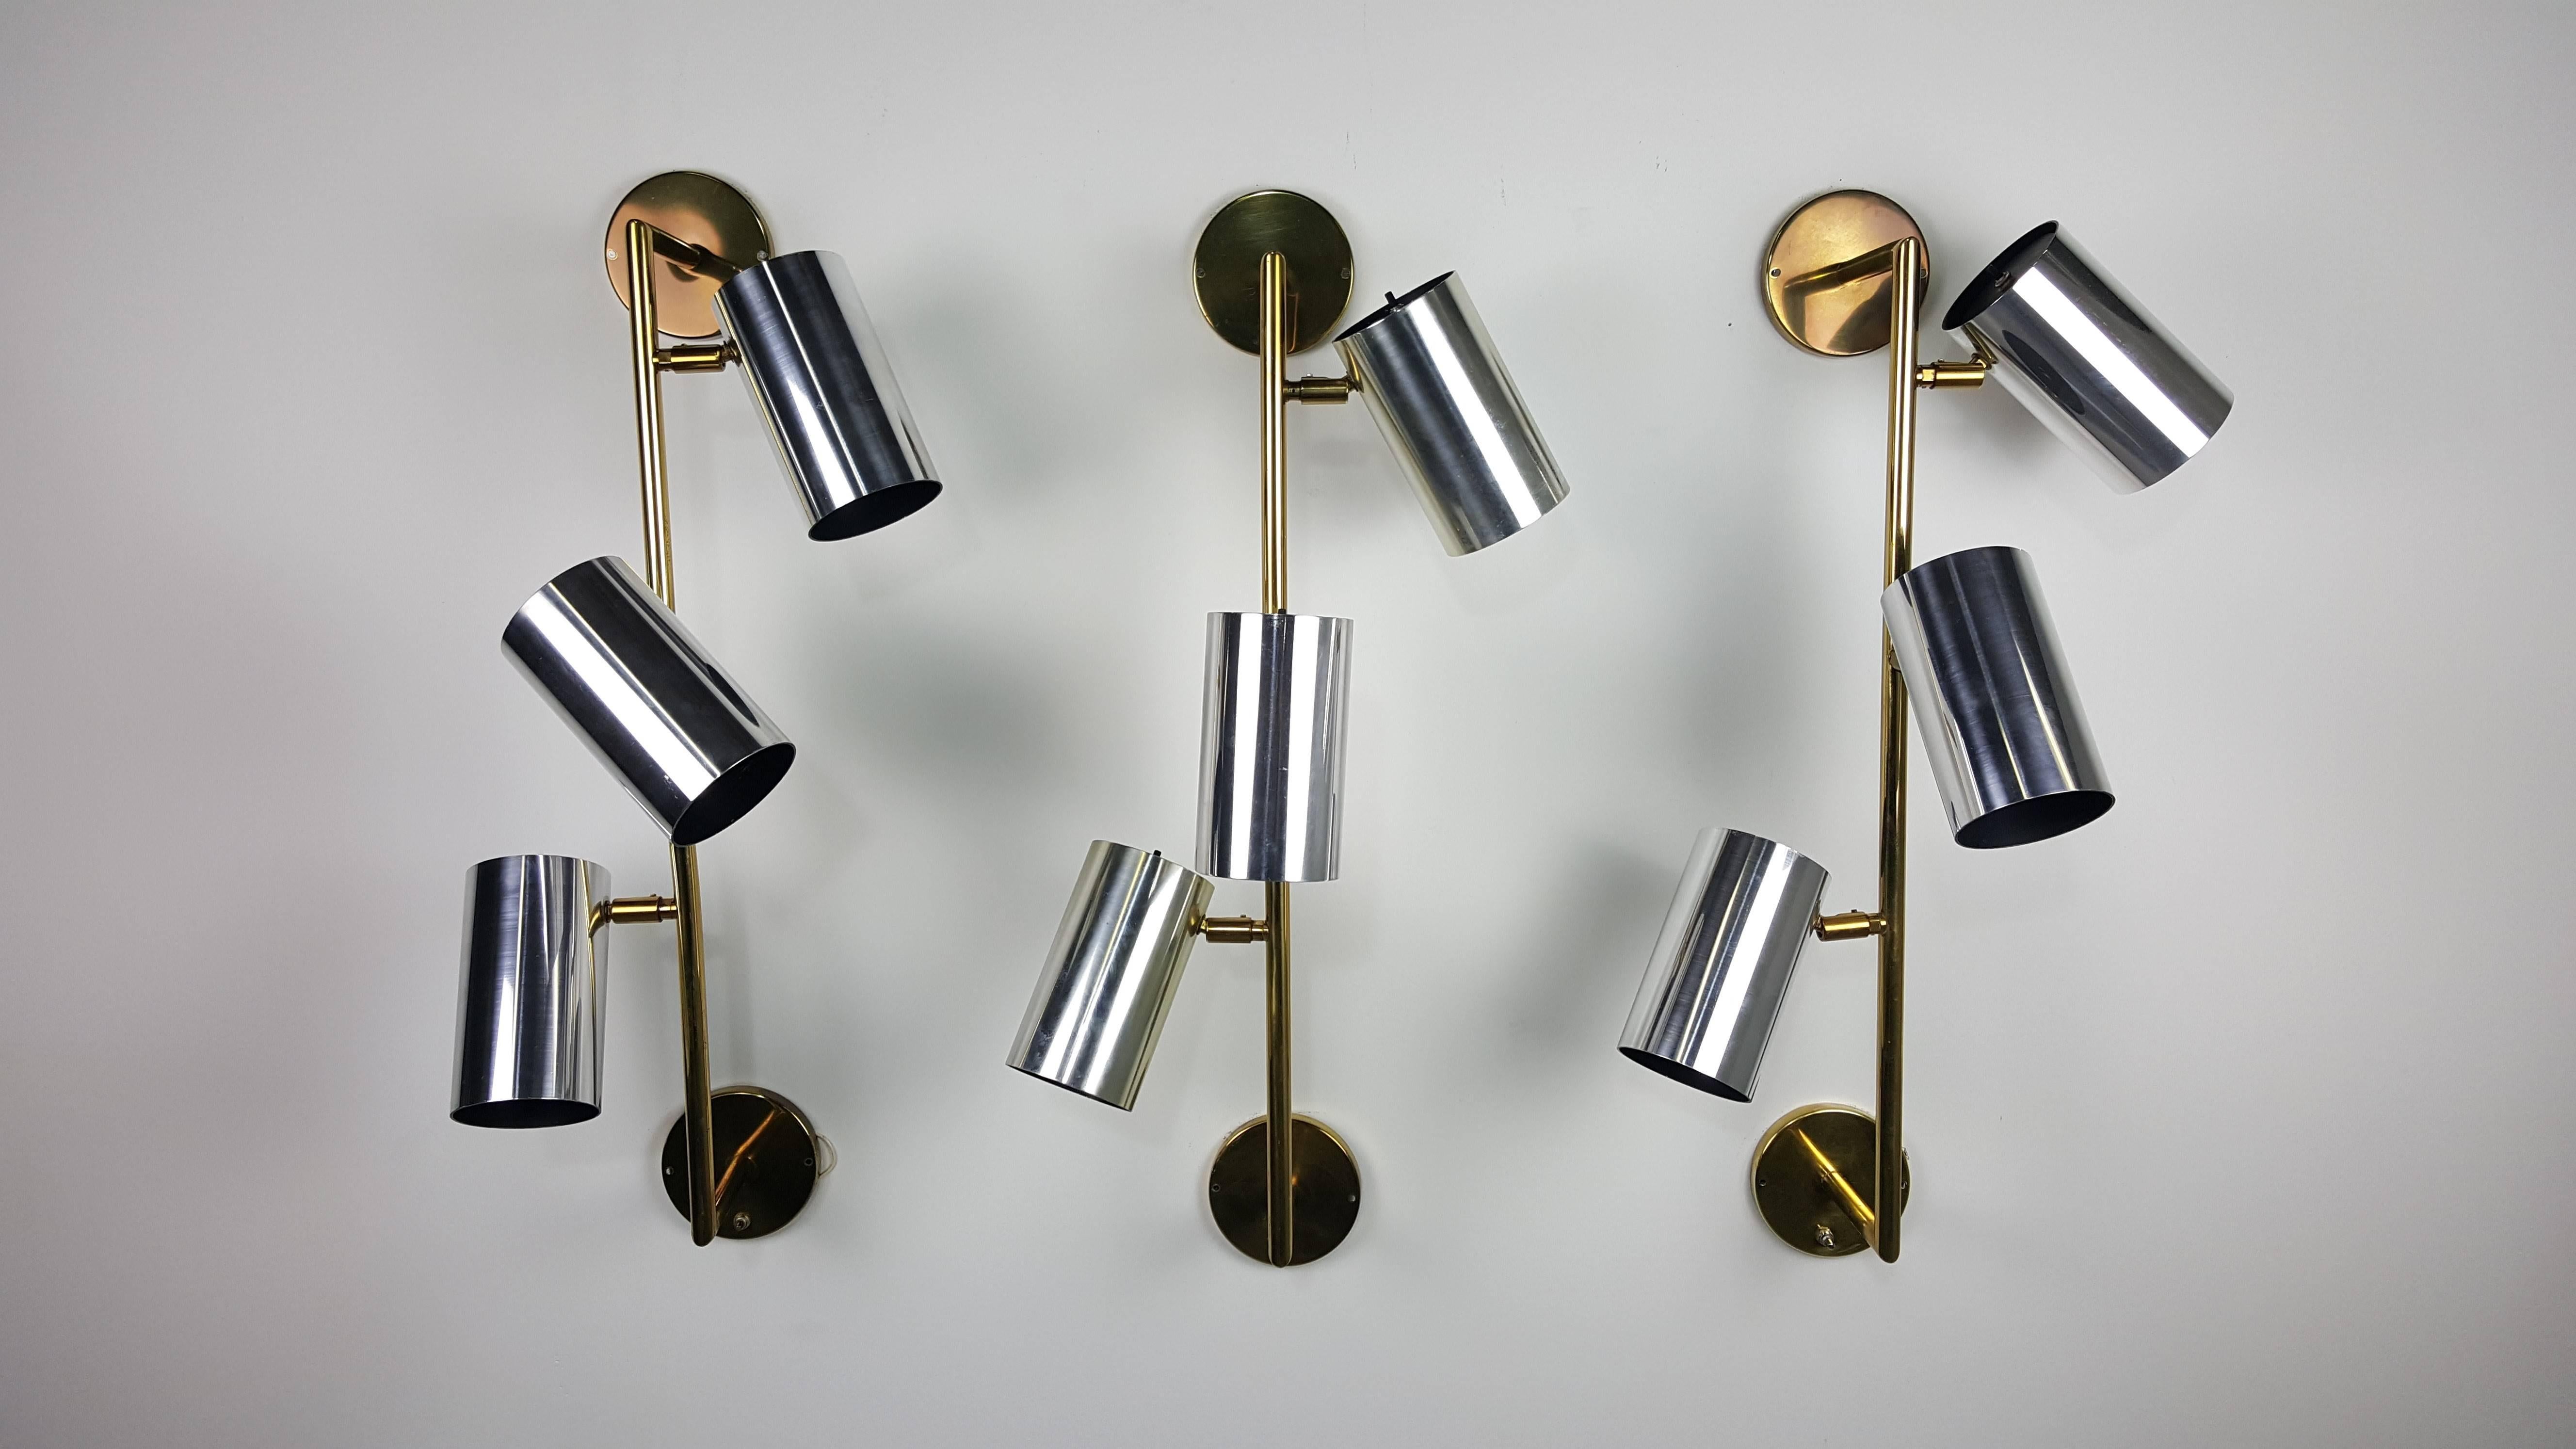 Massive brass and chrome architectural wall sconces by Koch and Lowy.

See this item in our private NYC showroom! Refine Limited is located in the heart of Chelsea at the history Starrett-LeHigh Building, 601 West 26th Street, Suite M258. Please